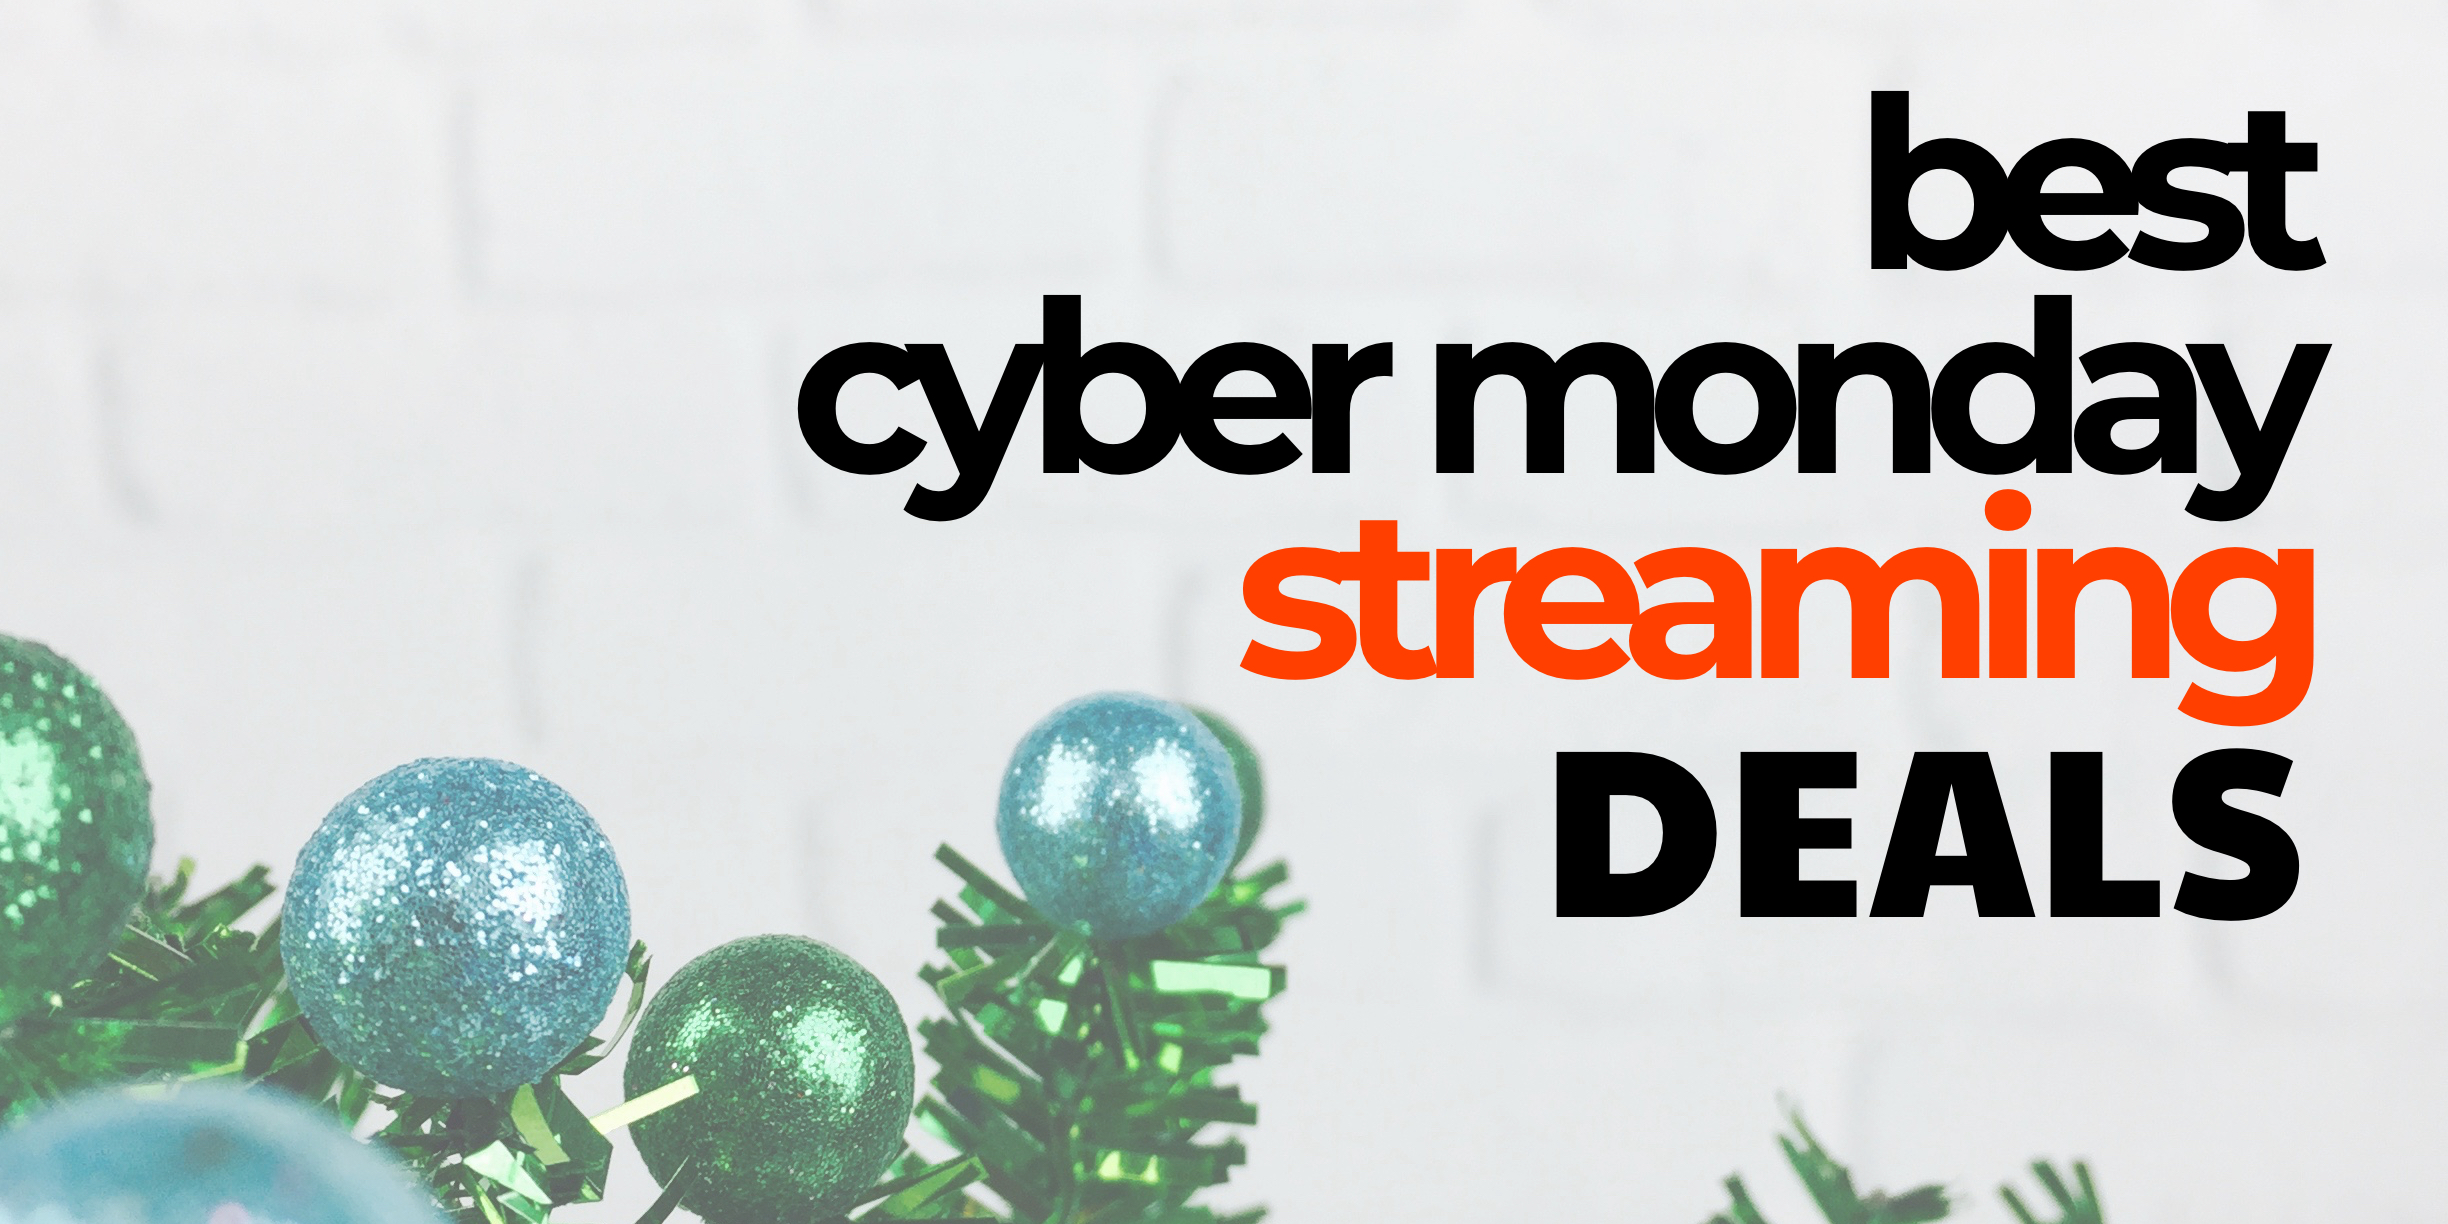 https://hellosubscription.com/wp-content/uploads/2022/11/best-cyber-monday-streaming-deals.jpg?quality=90&strip=all